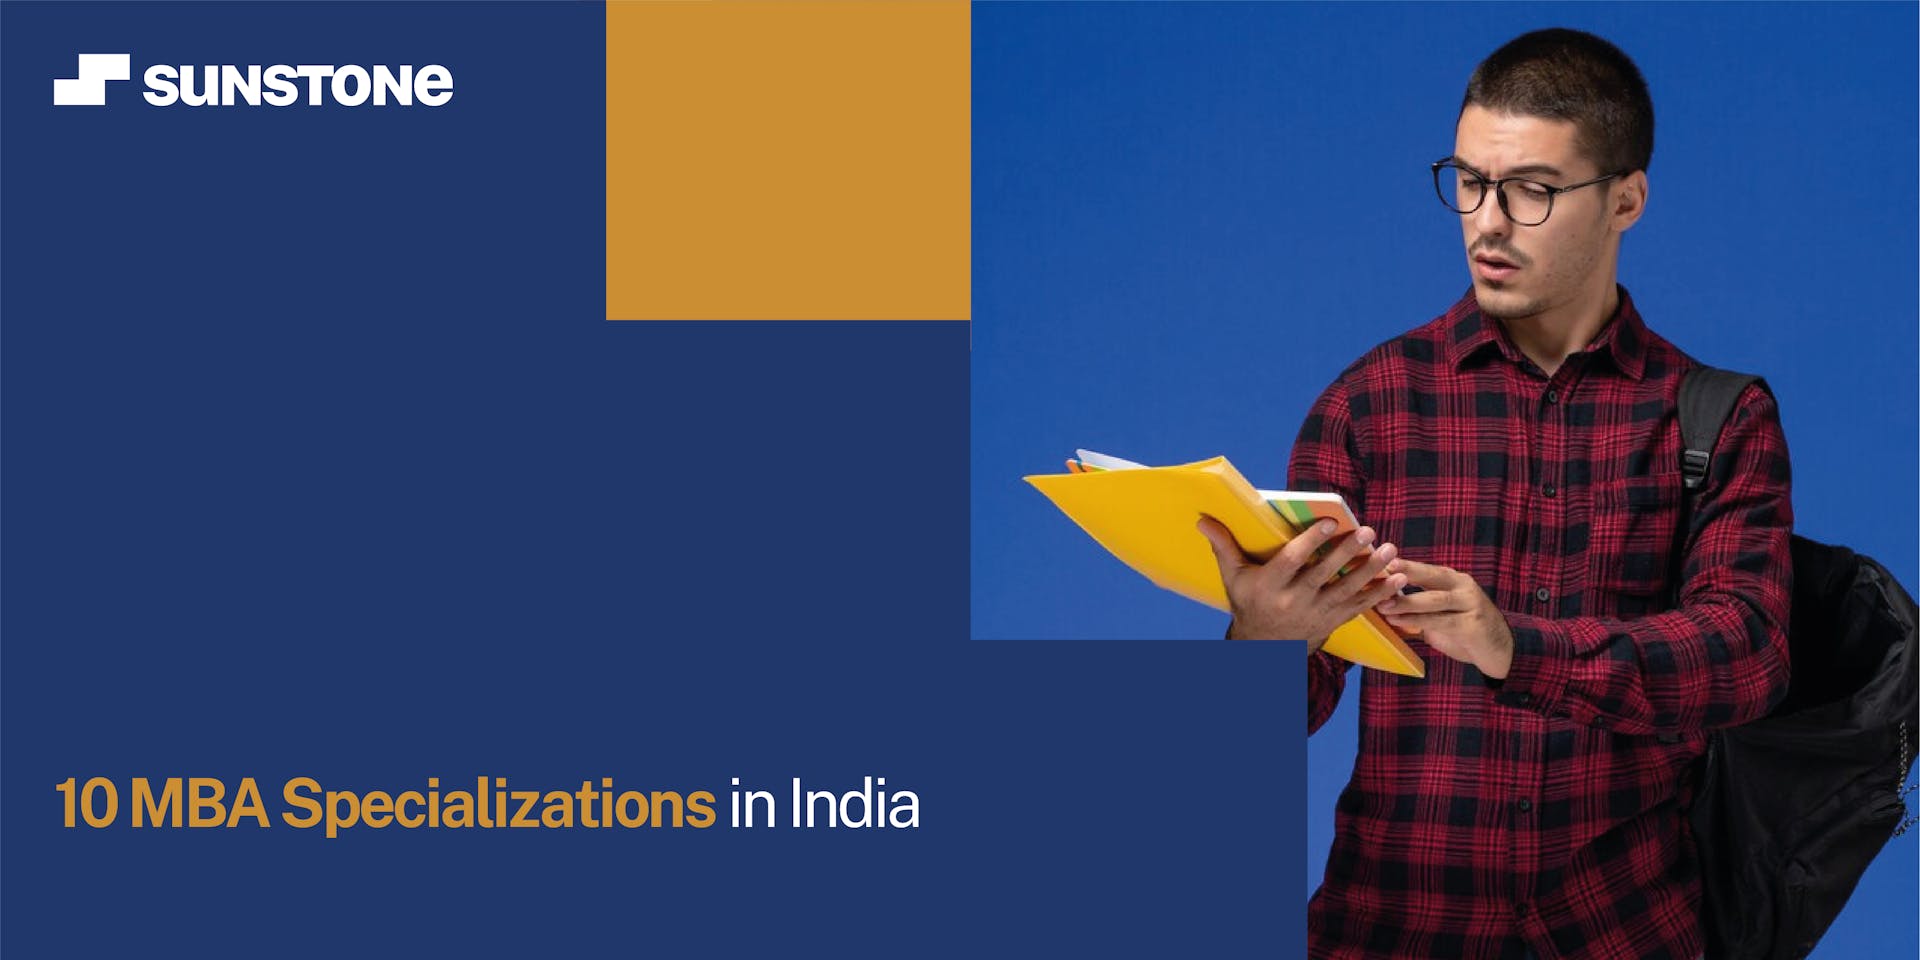 10 MBA Specializations in India